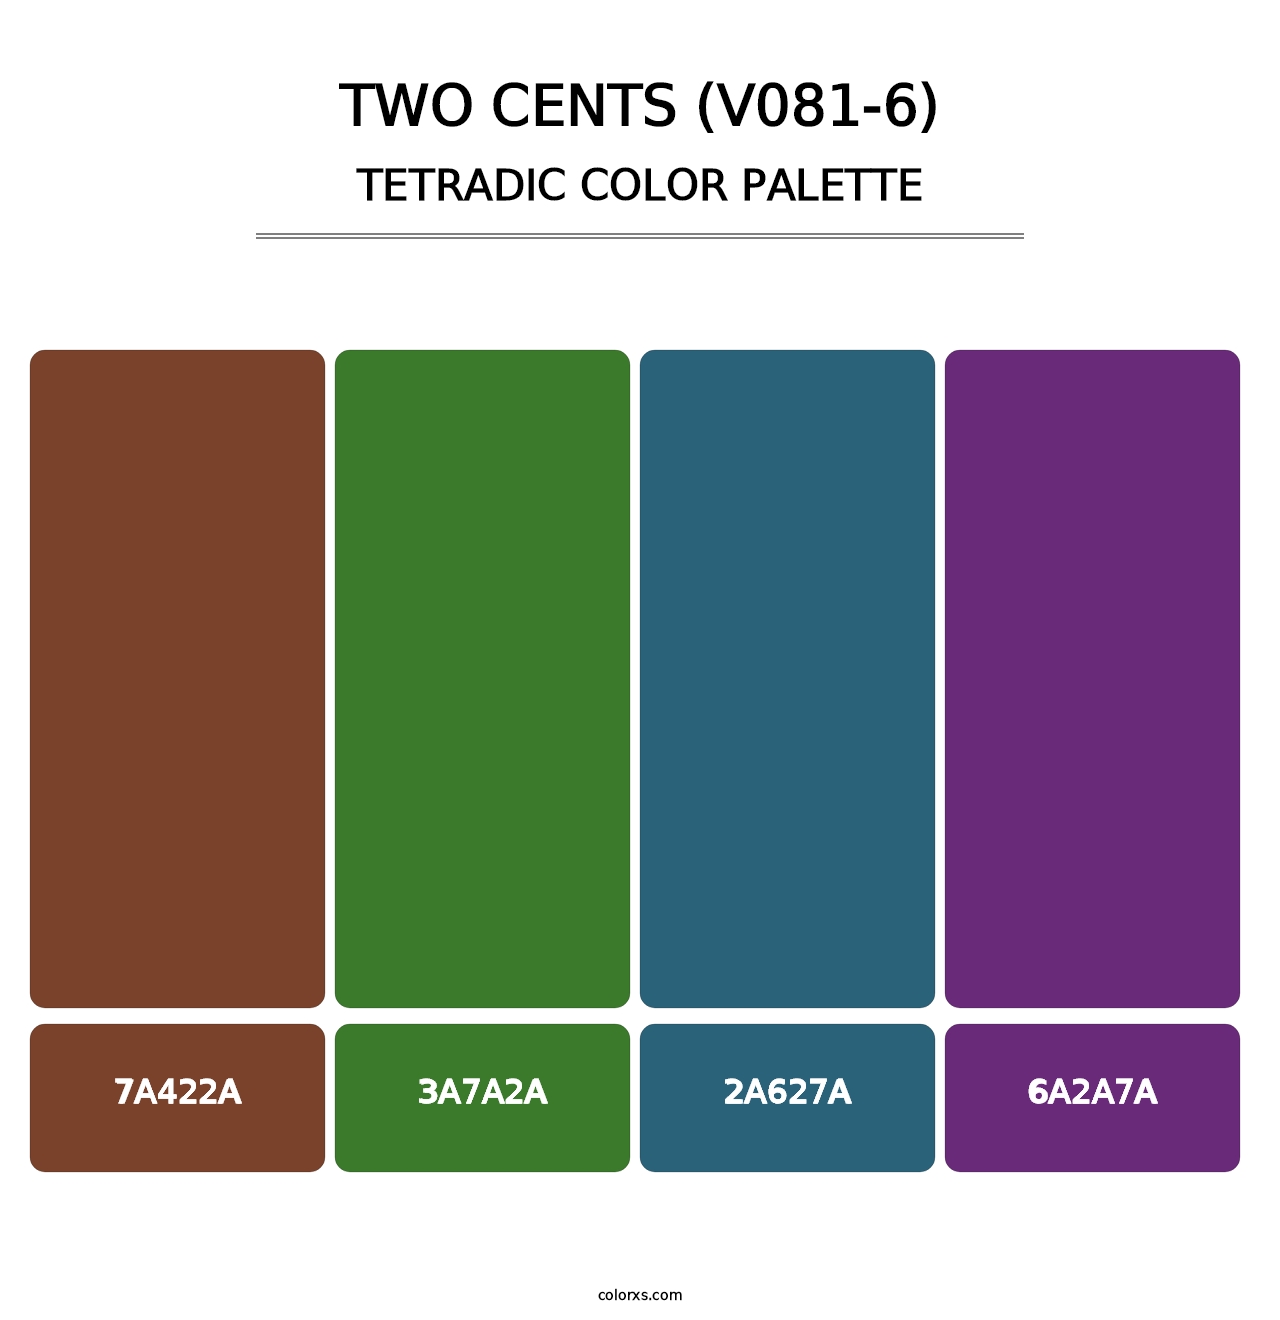 Two Cents (V081-6) - Tetradic Color Palette